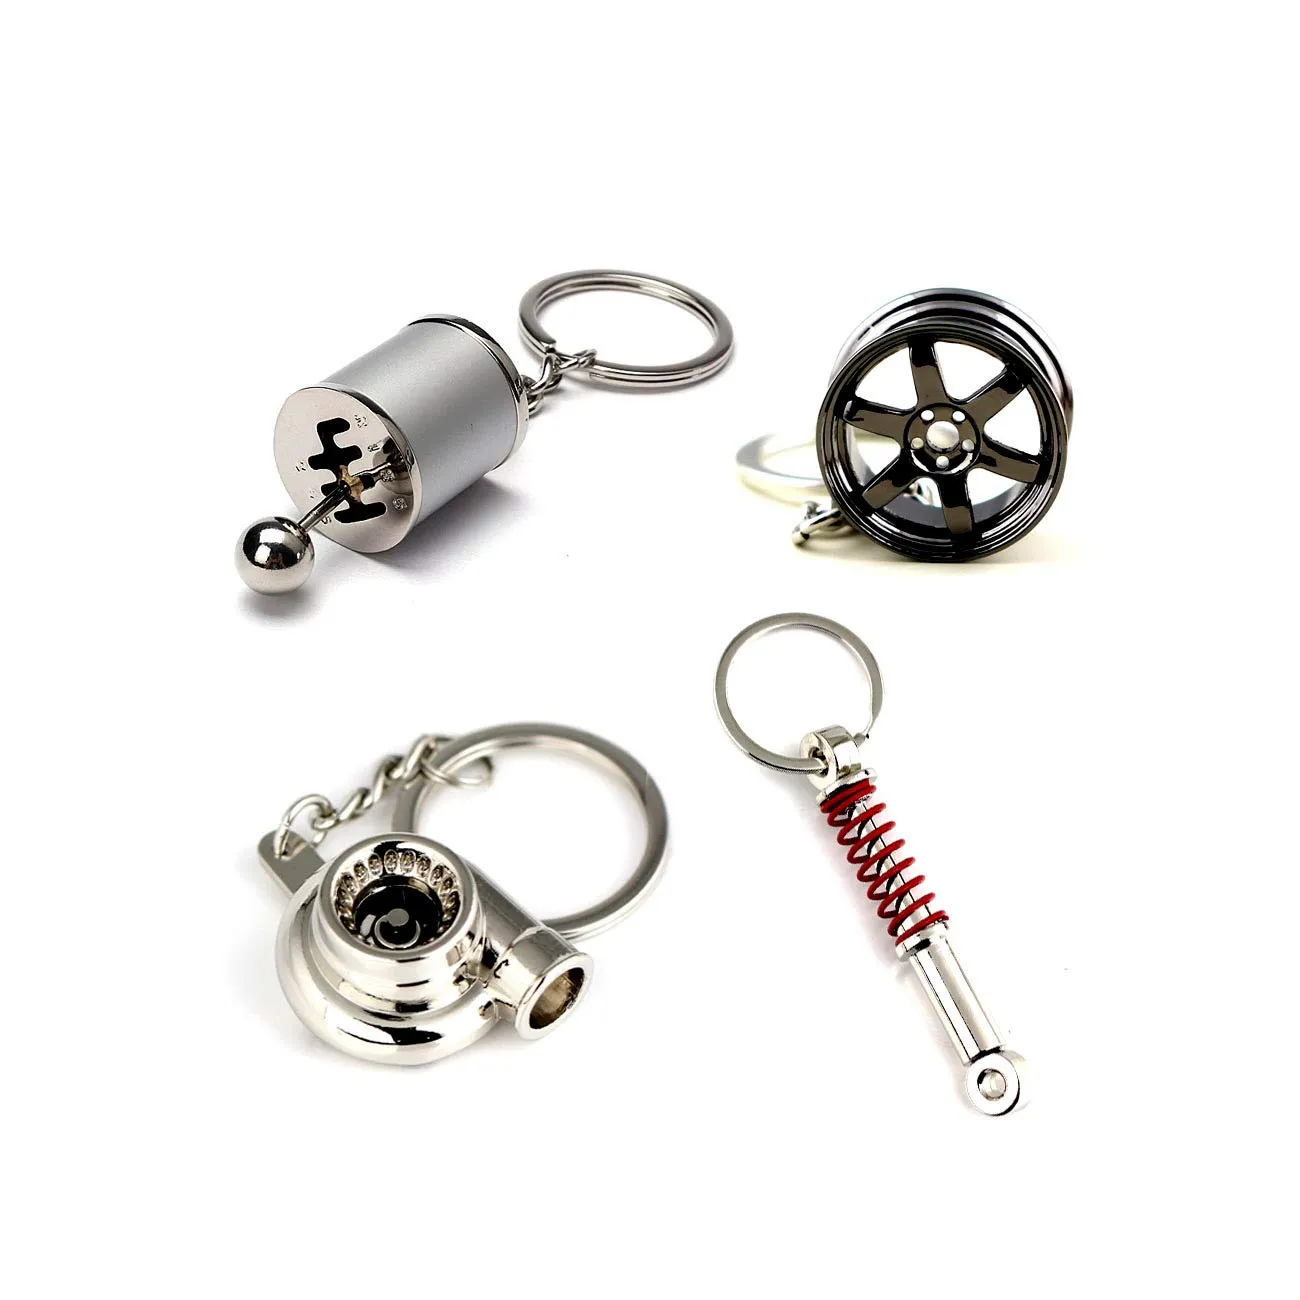 3ml car parts model key chains colorful turbo keychain black manual gearbox keychain colorful tire rim keychain blue brake rotor keychain red spring shockabsorber keychain